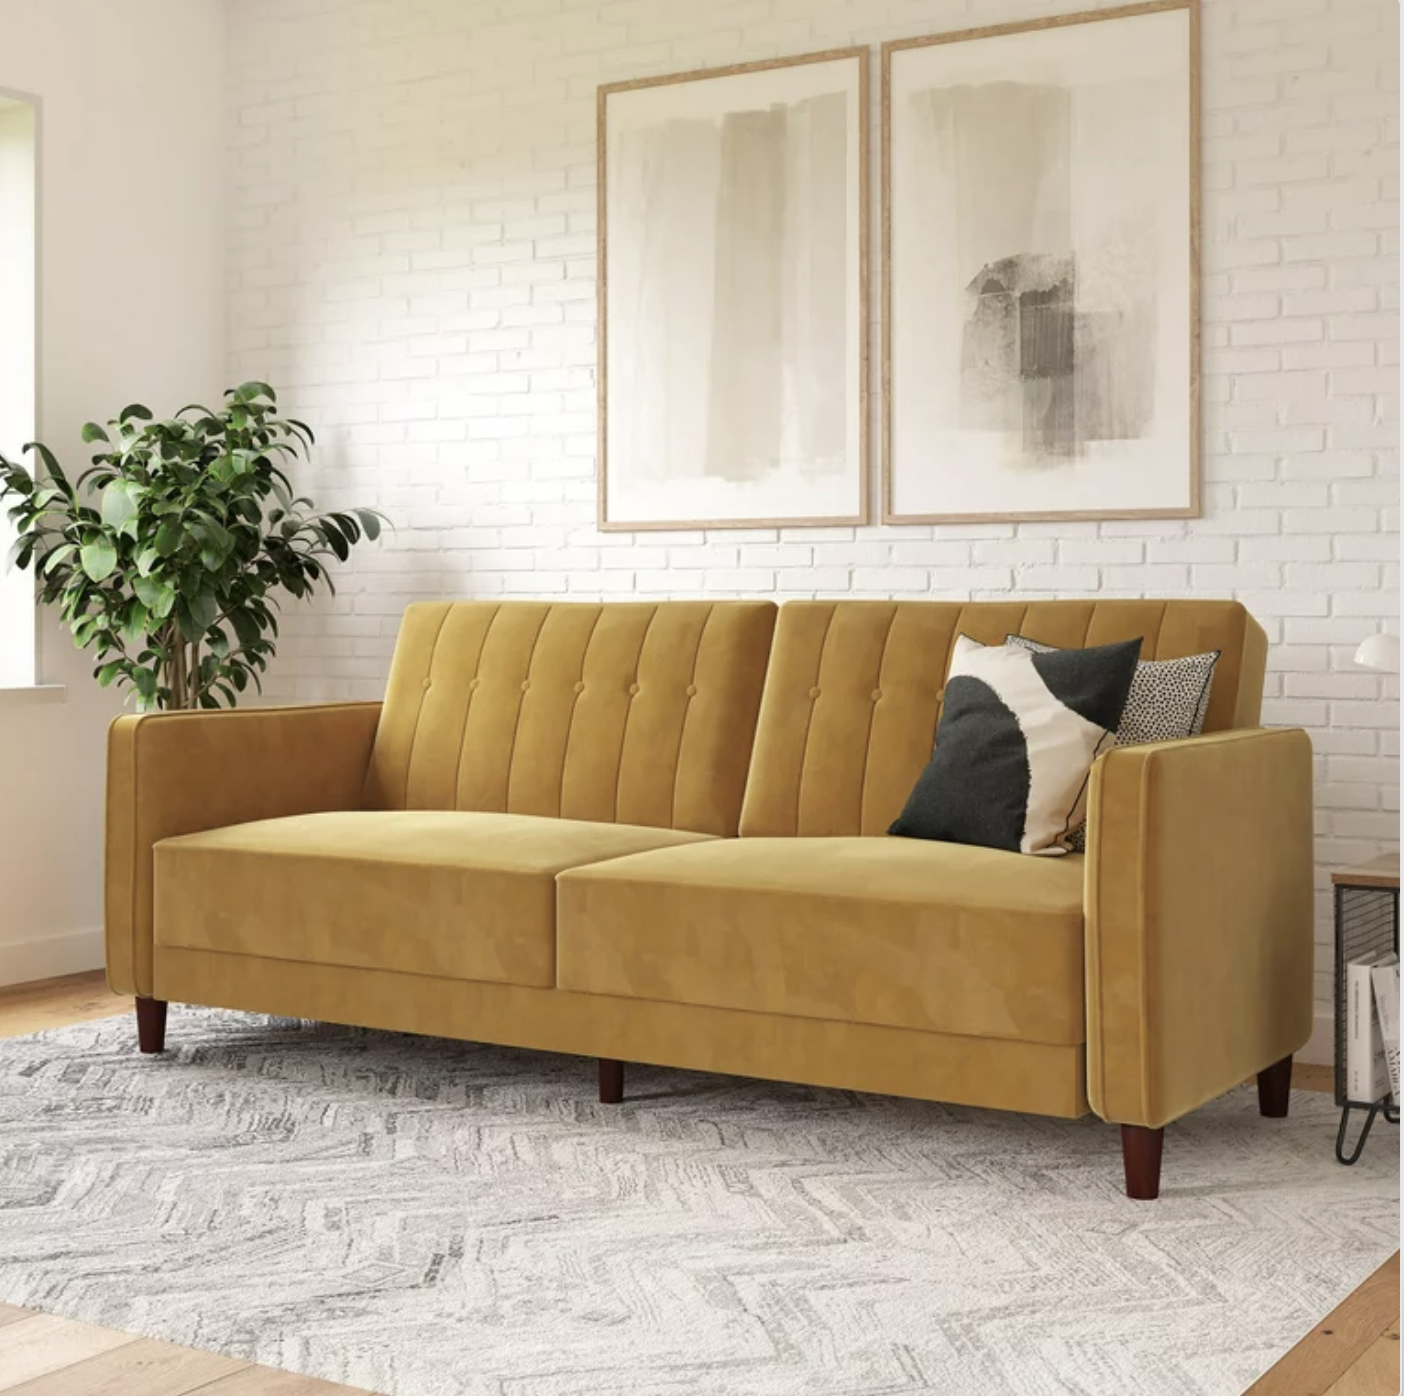 15 Most Comfortable Futons Of 2023, Per A Back Expert And Reviews